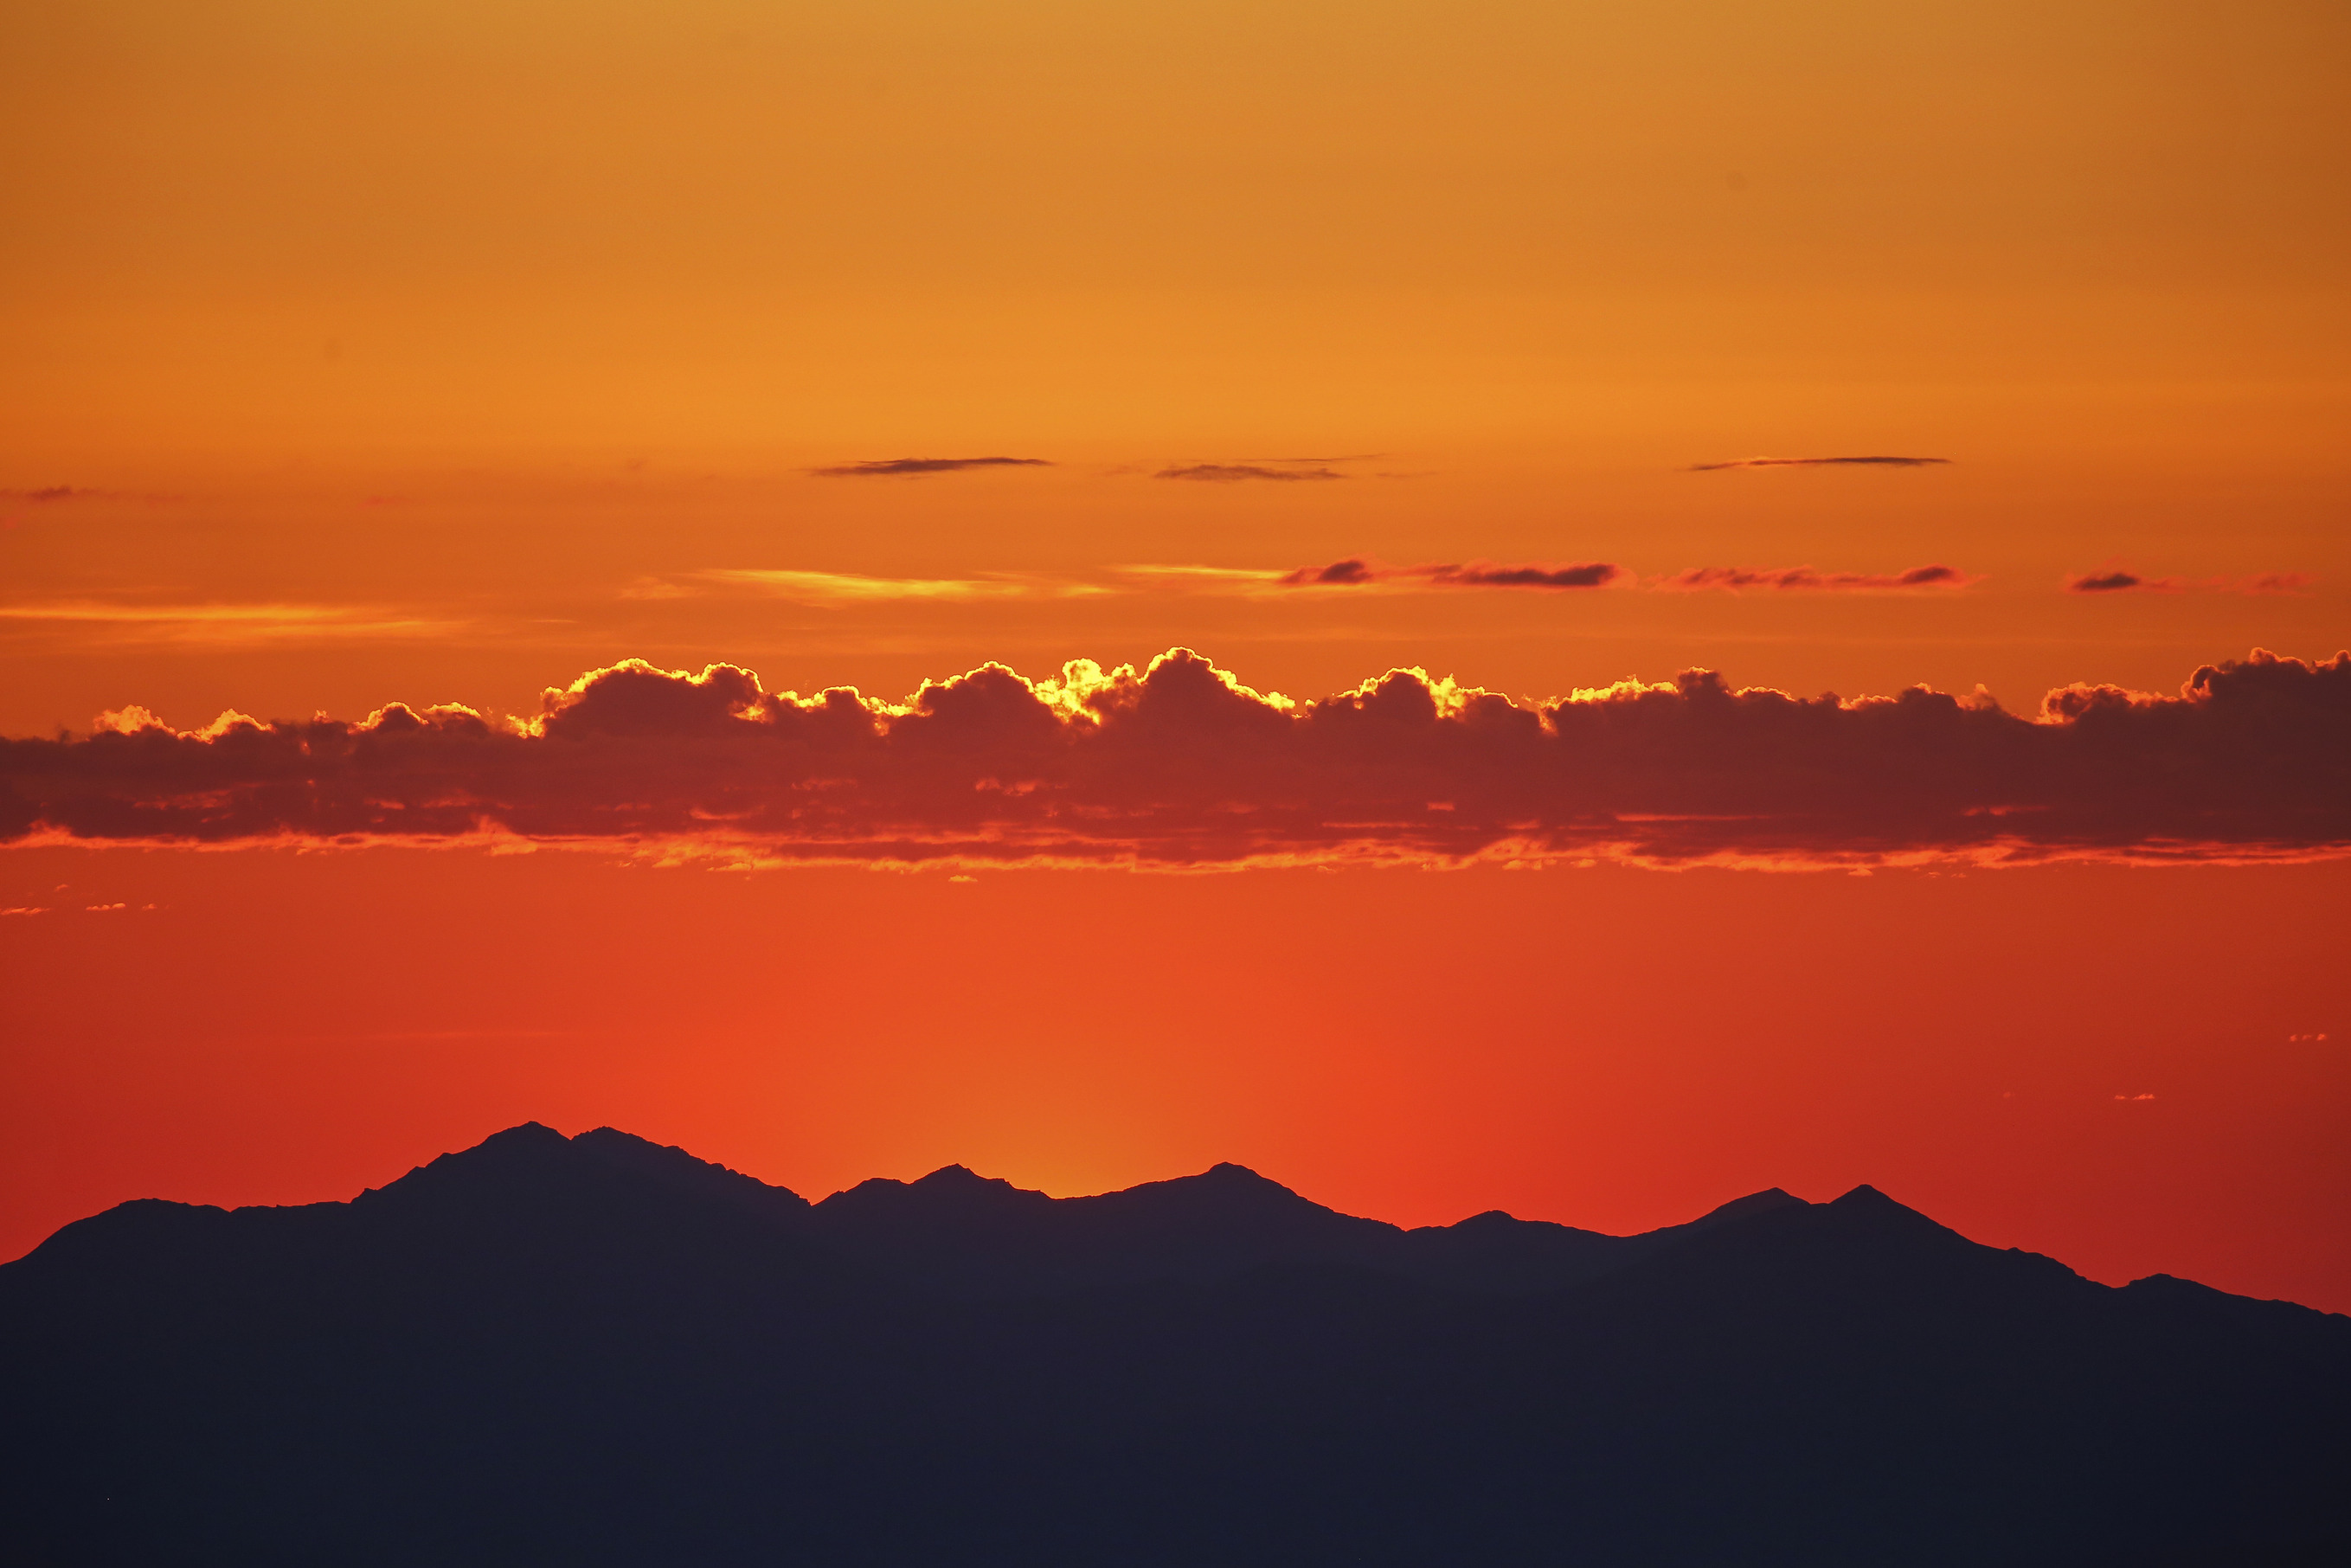 a row of clouds hanging in an orange sky over dark mountains